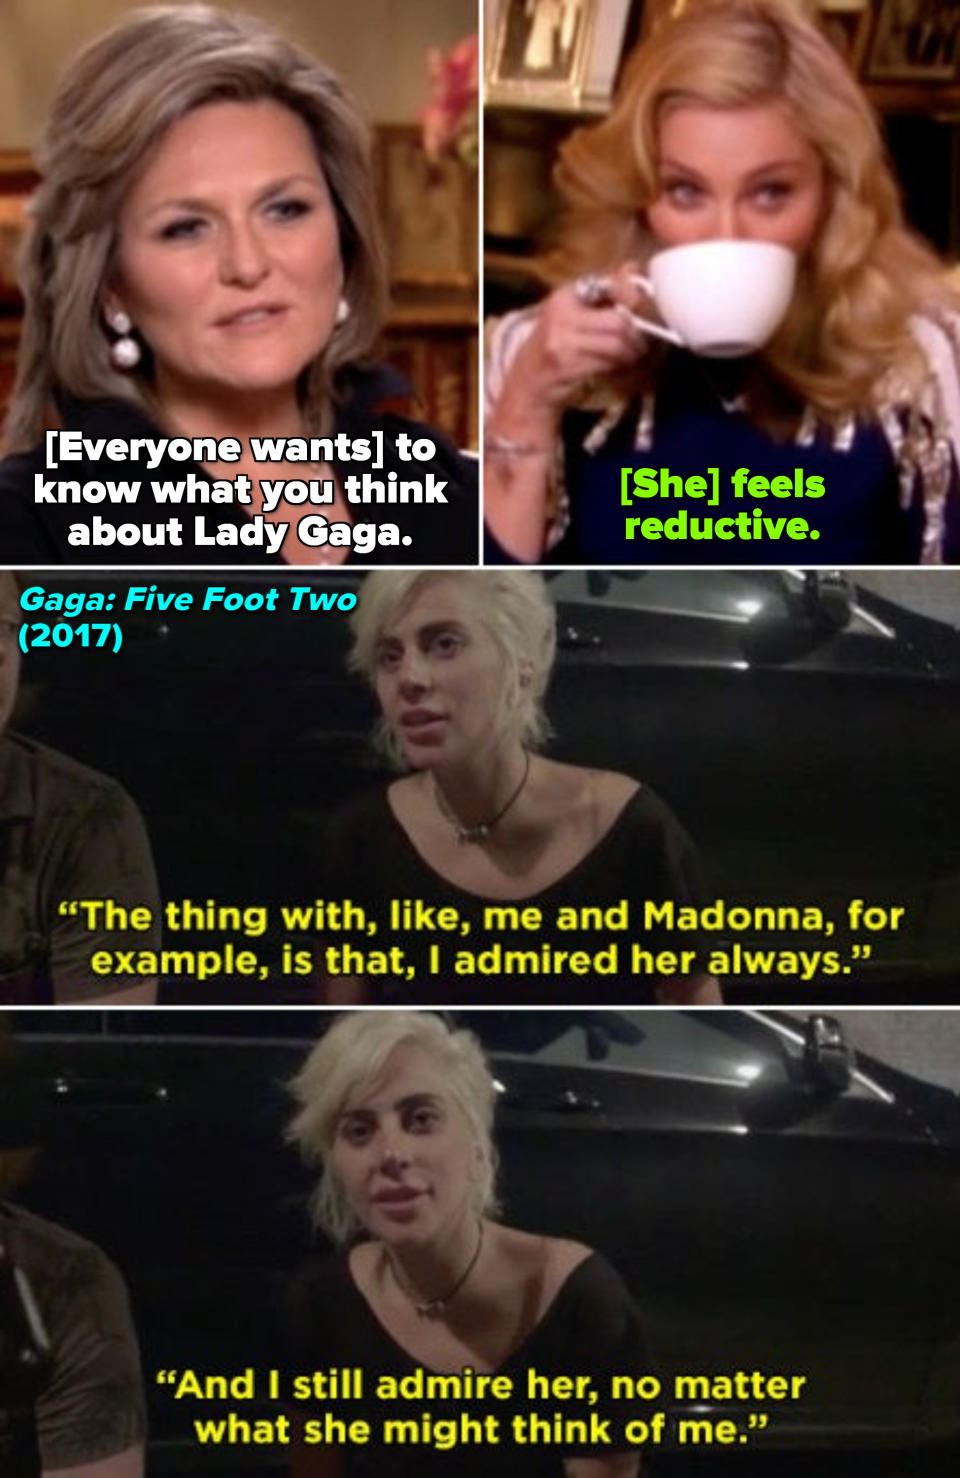 Madonna saying Gaga is "reductive" in an interview; Gaga in "Gaga: Five Foot Two" saying: "I admired [Madonna] always, and I still admire her"